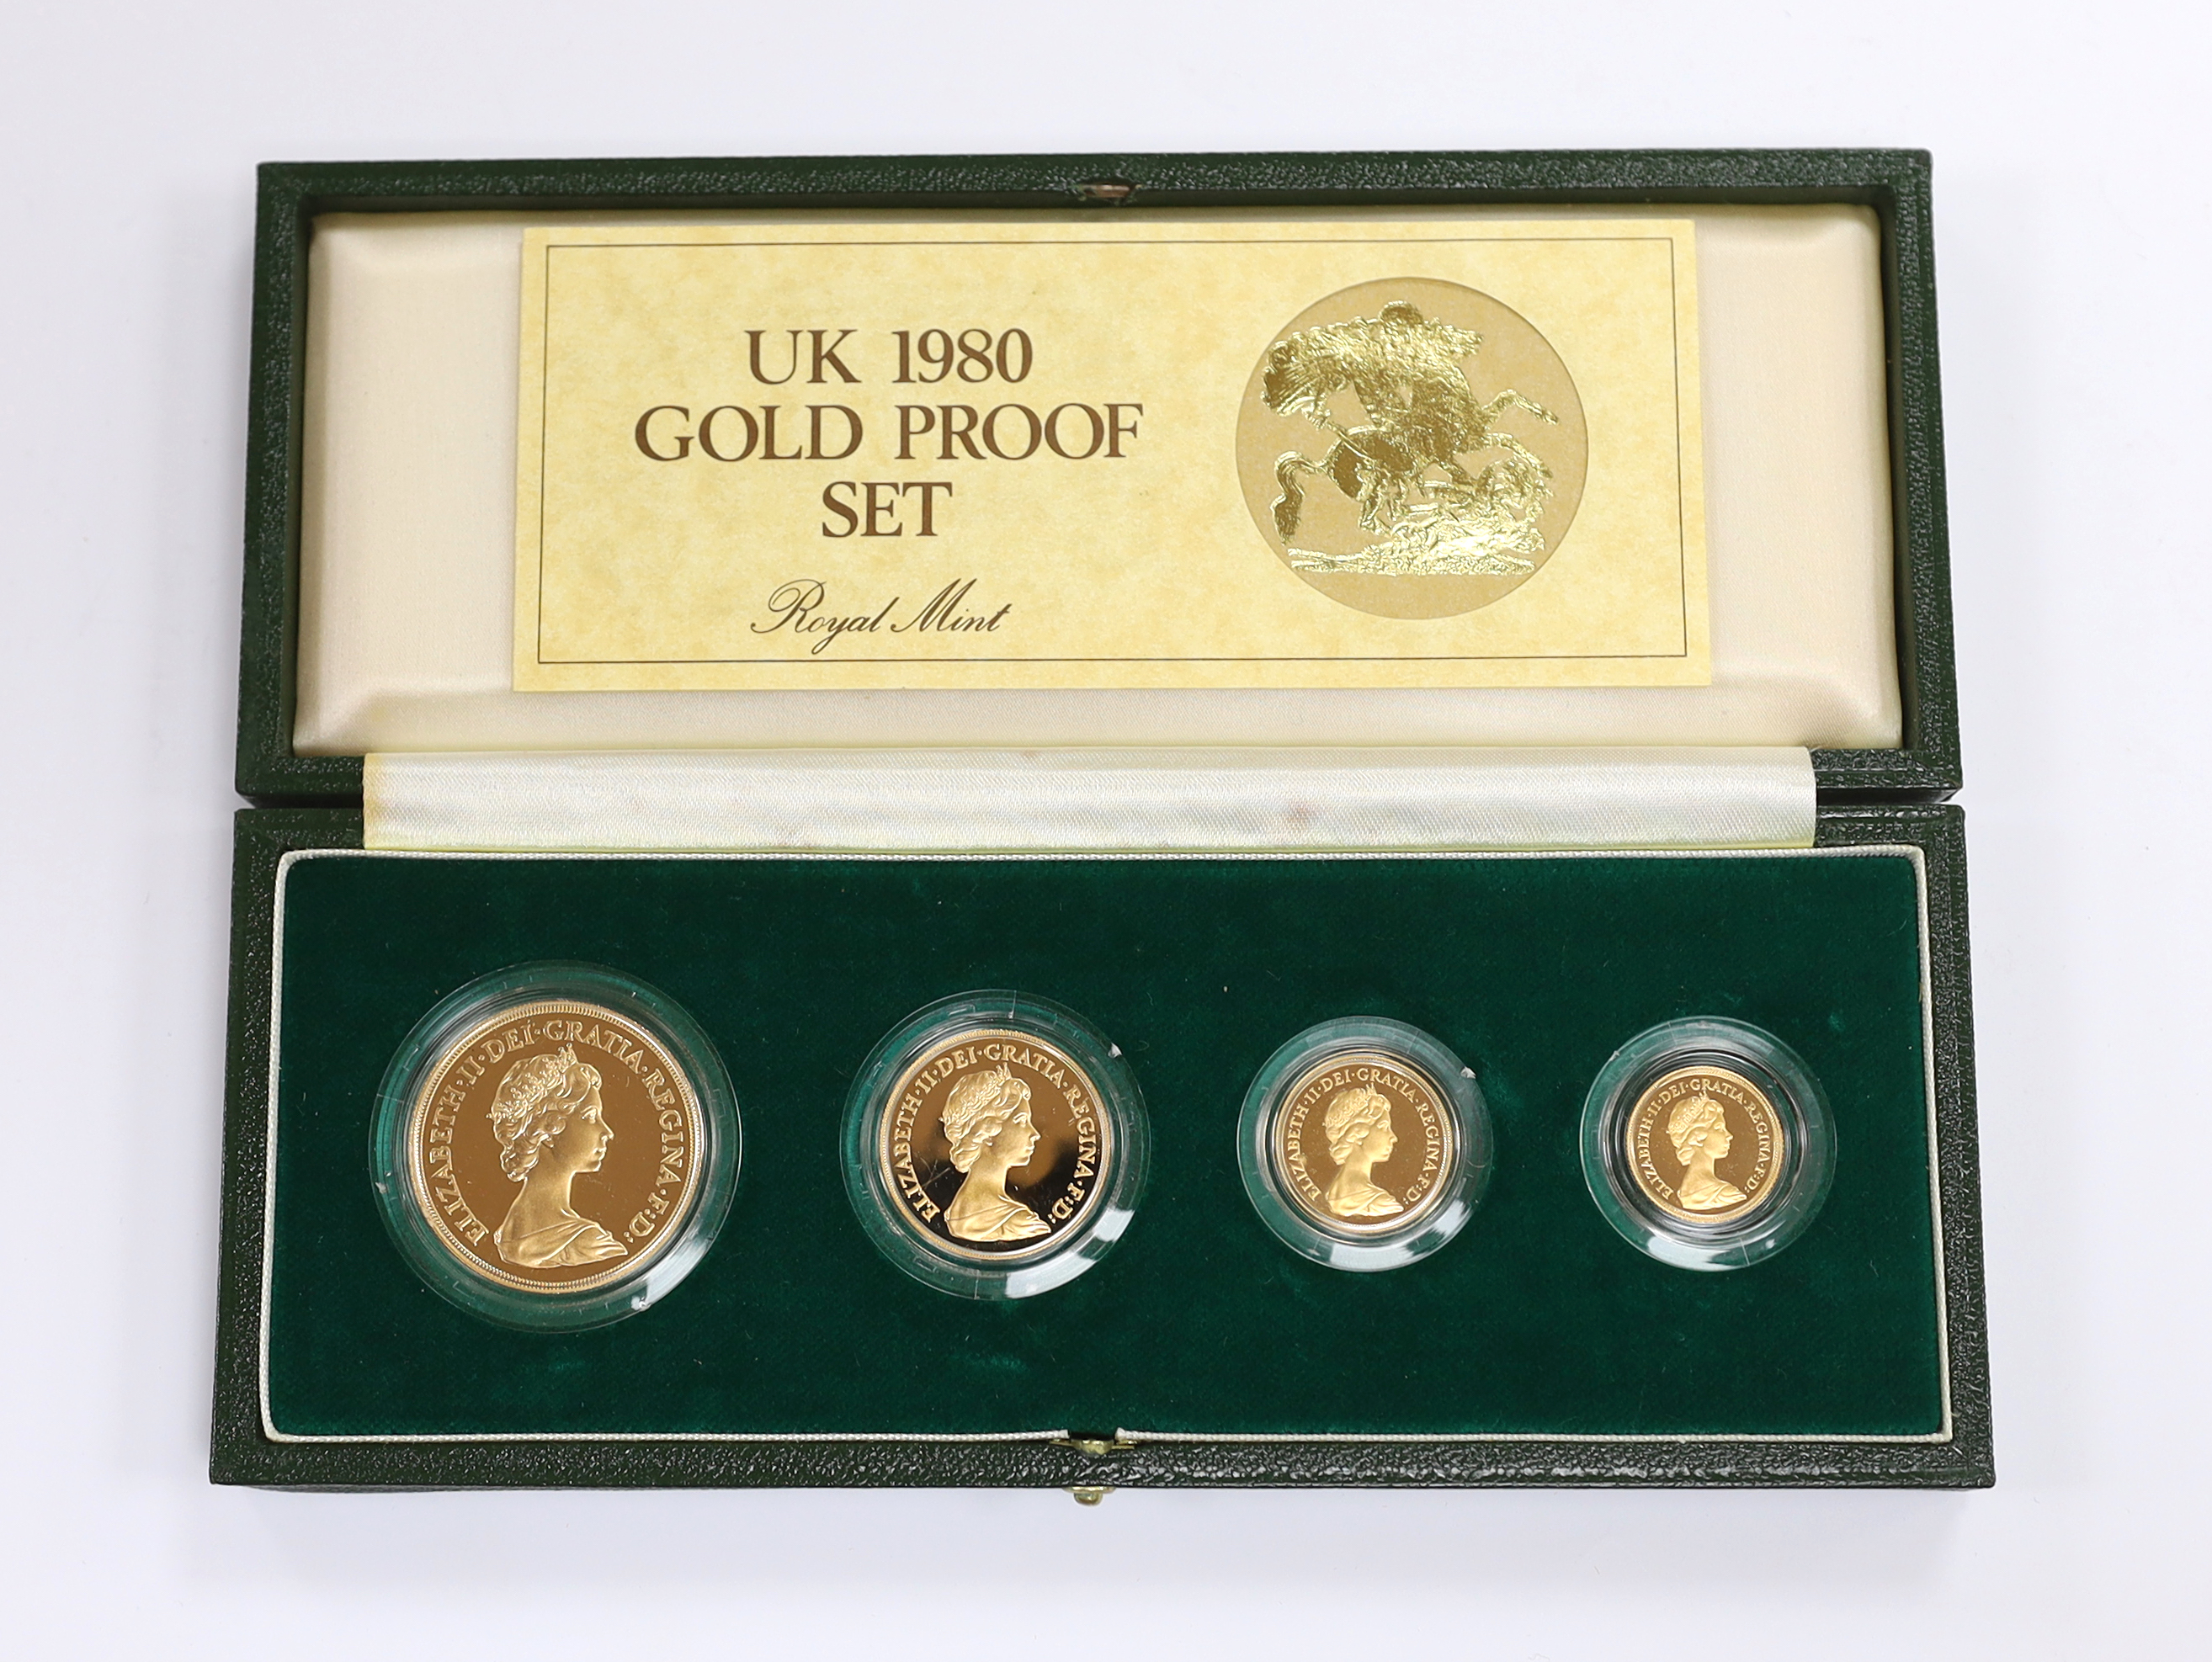 British gold coins - A Royal Mint UK QEII Gold Proof Set, 1980, comprising £5, £2, sovereign and